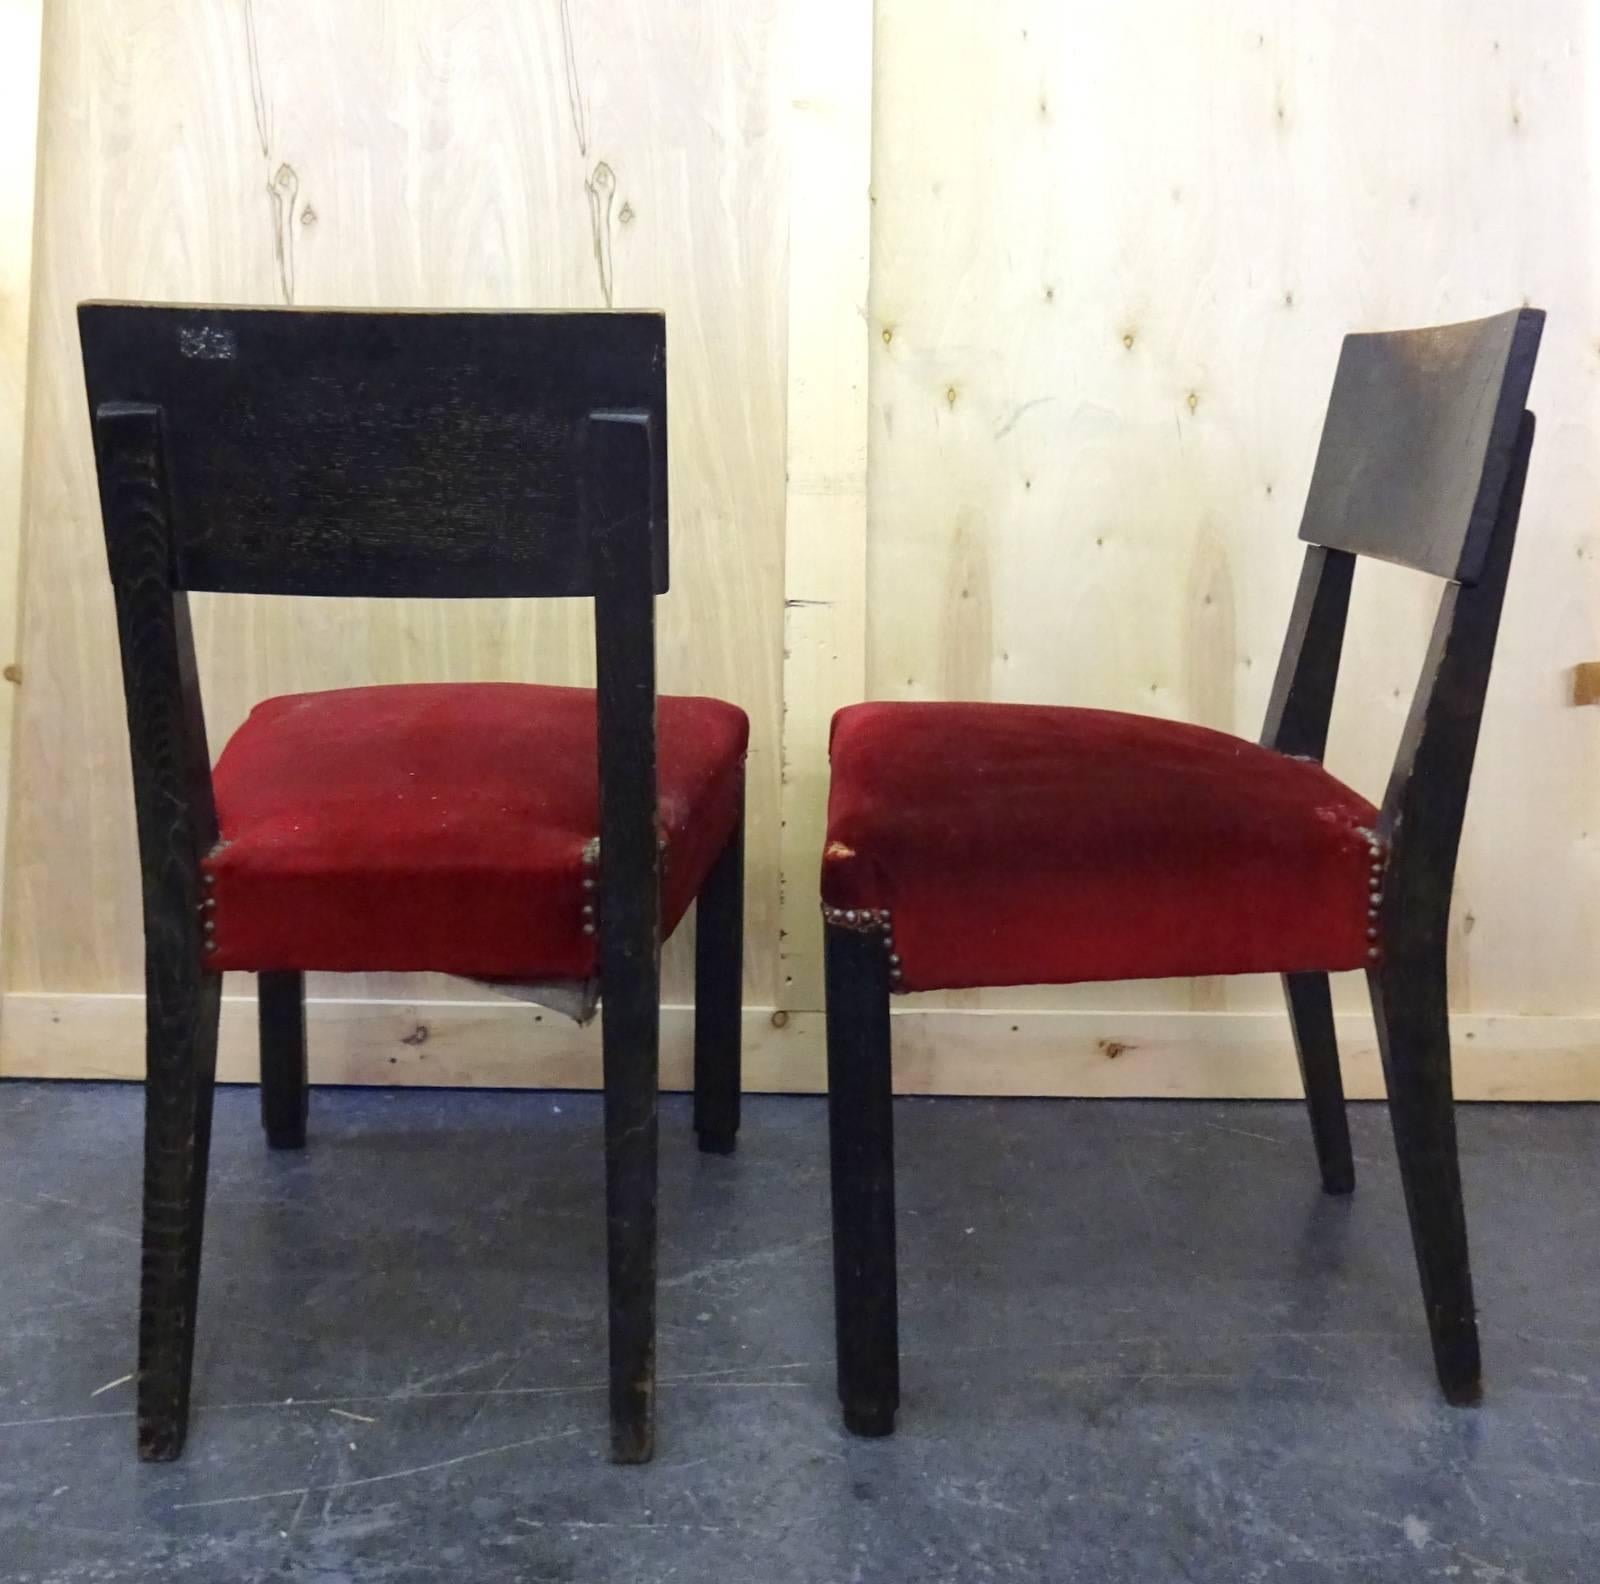 Chairs in original condition from the 1940s
Located in Brooklyn.